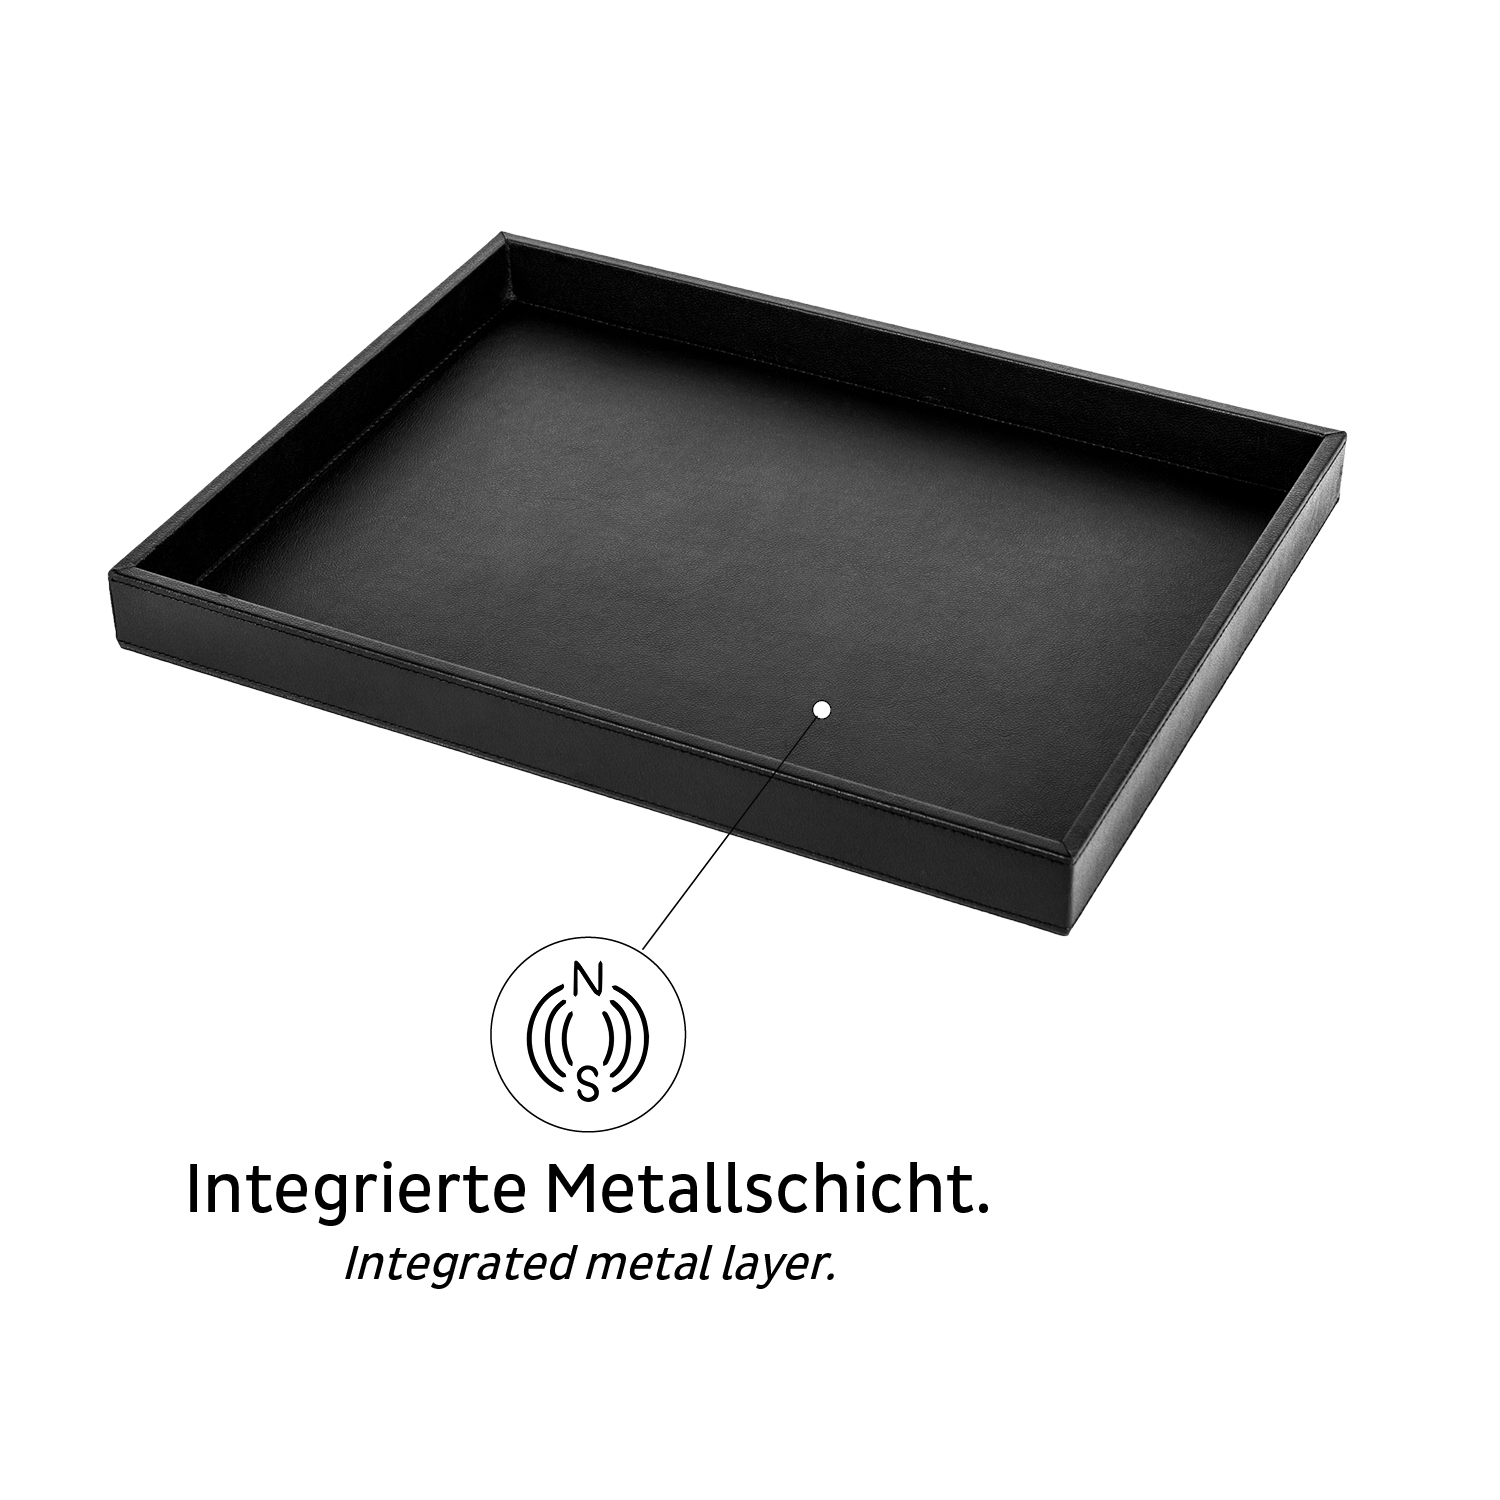 | in Magnetglas-System silwy für cleveres Germany - Metall-Nano-Matte Made